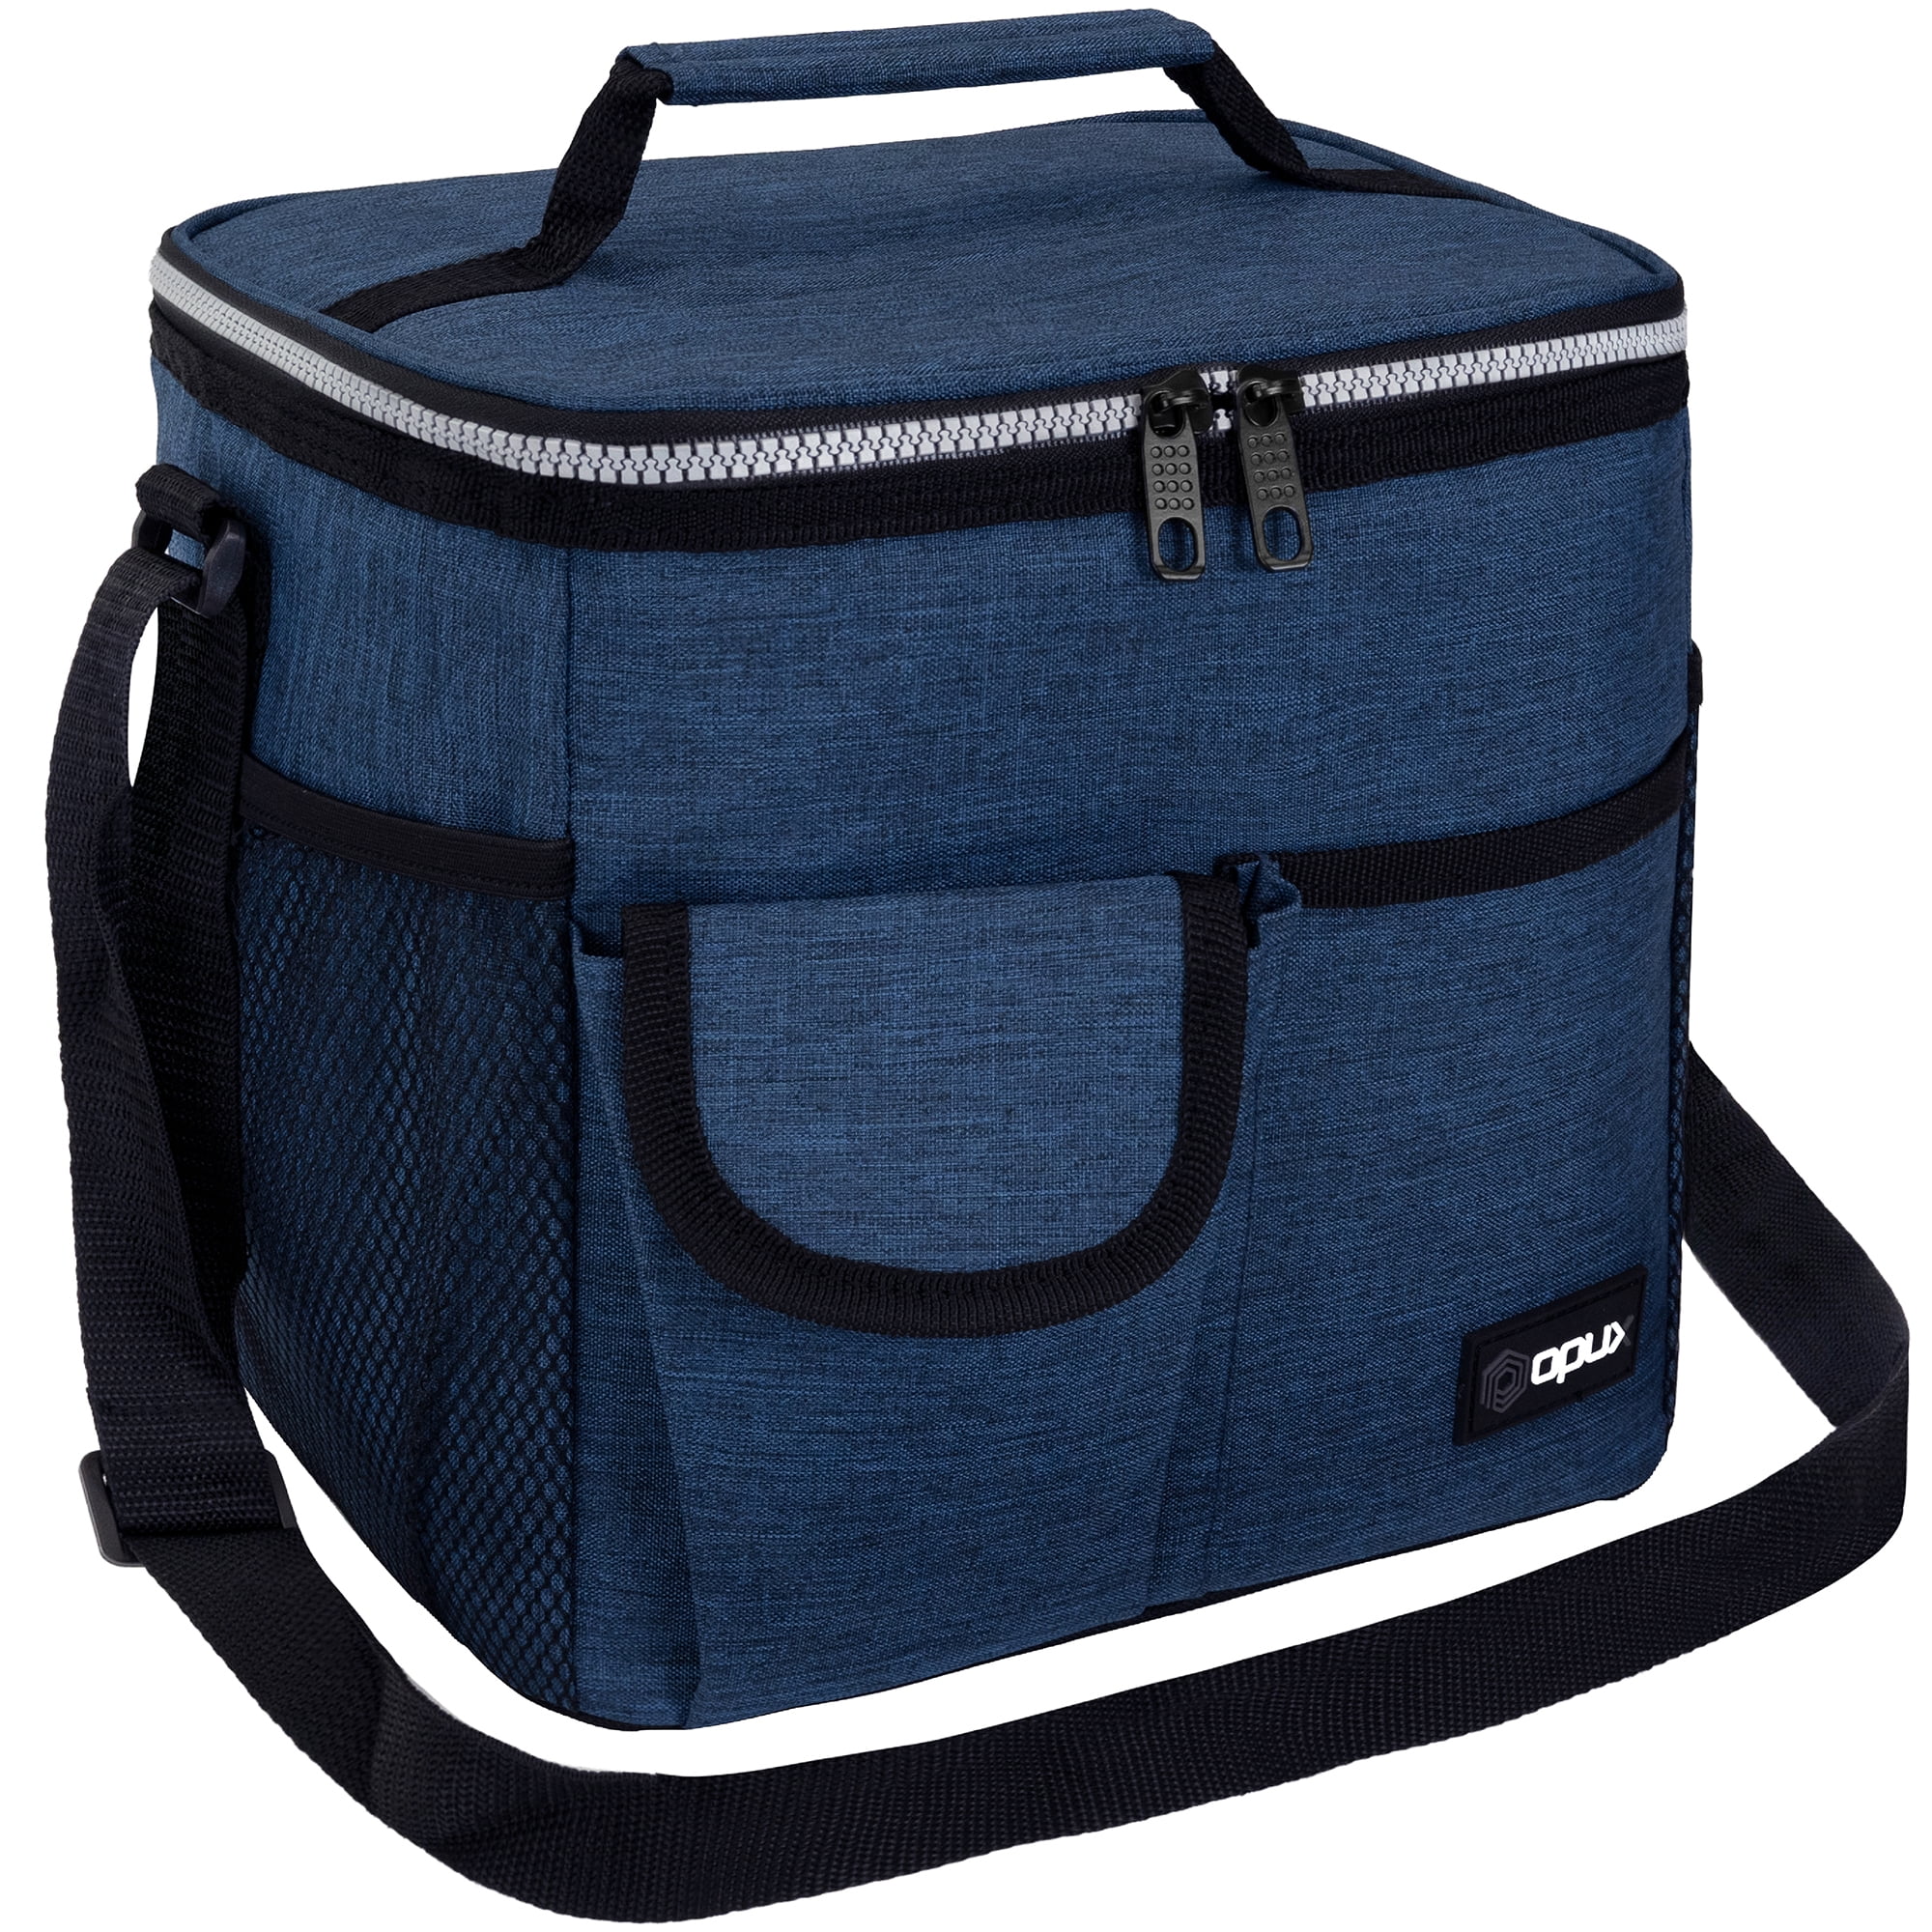 OPUX Large Insulated Lunch Bag for Men Women, Leakproof Thermal Lunch Box  Work School, Soft Lunch Cooler Tote Bag with Shoulder Strap for Adult Kid